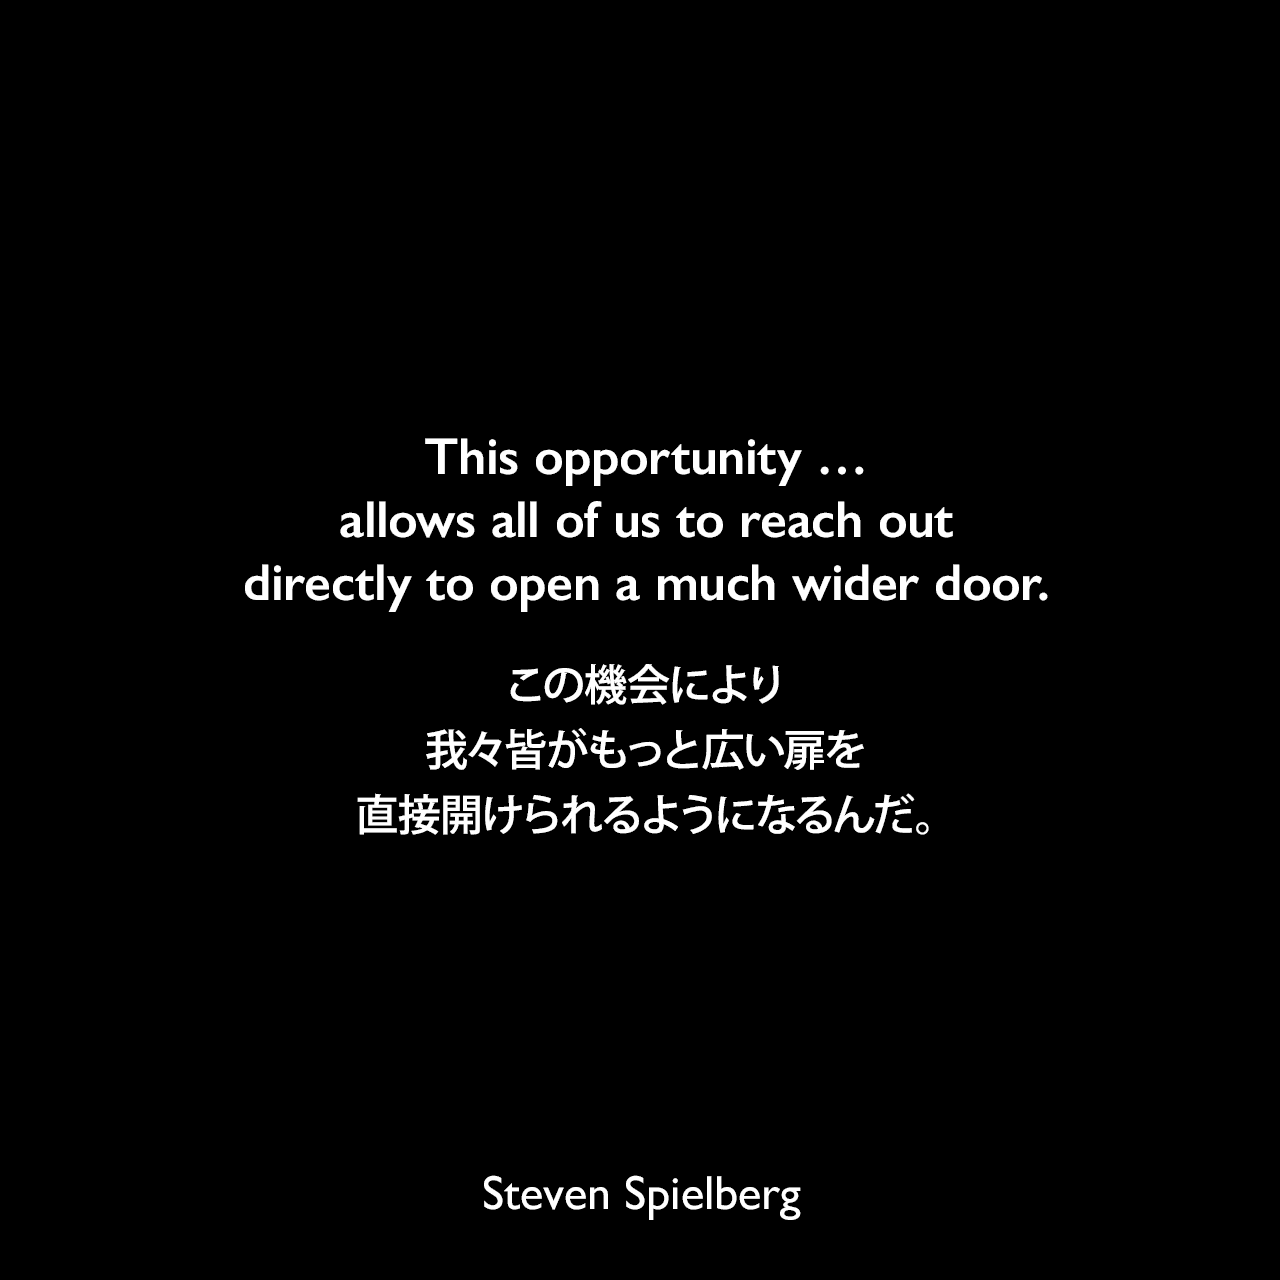 This opportunity … allows all of us to reach out directly to open a much wider door.この機会により、我々皆がもっと広い扉を直接開けられるようになるんだ。Steven Spielberg